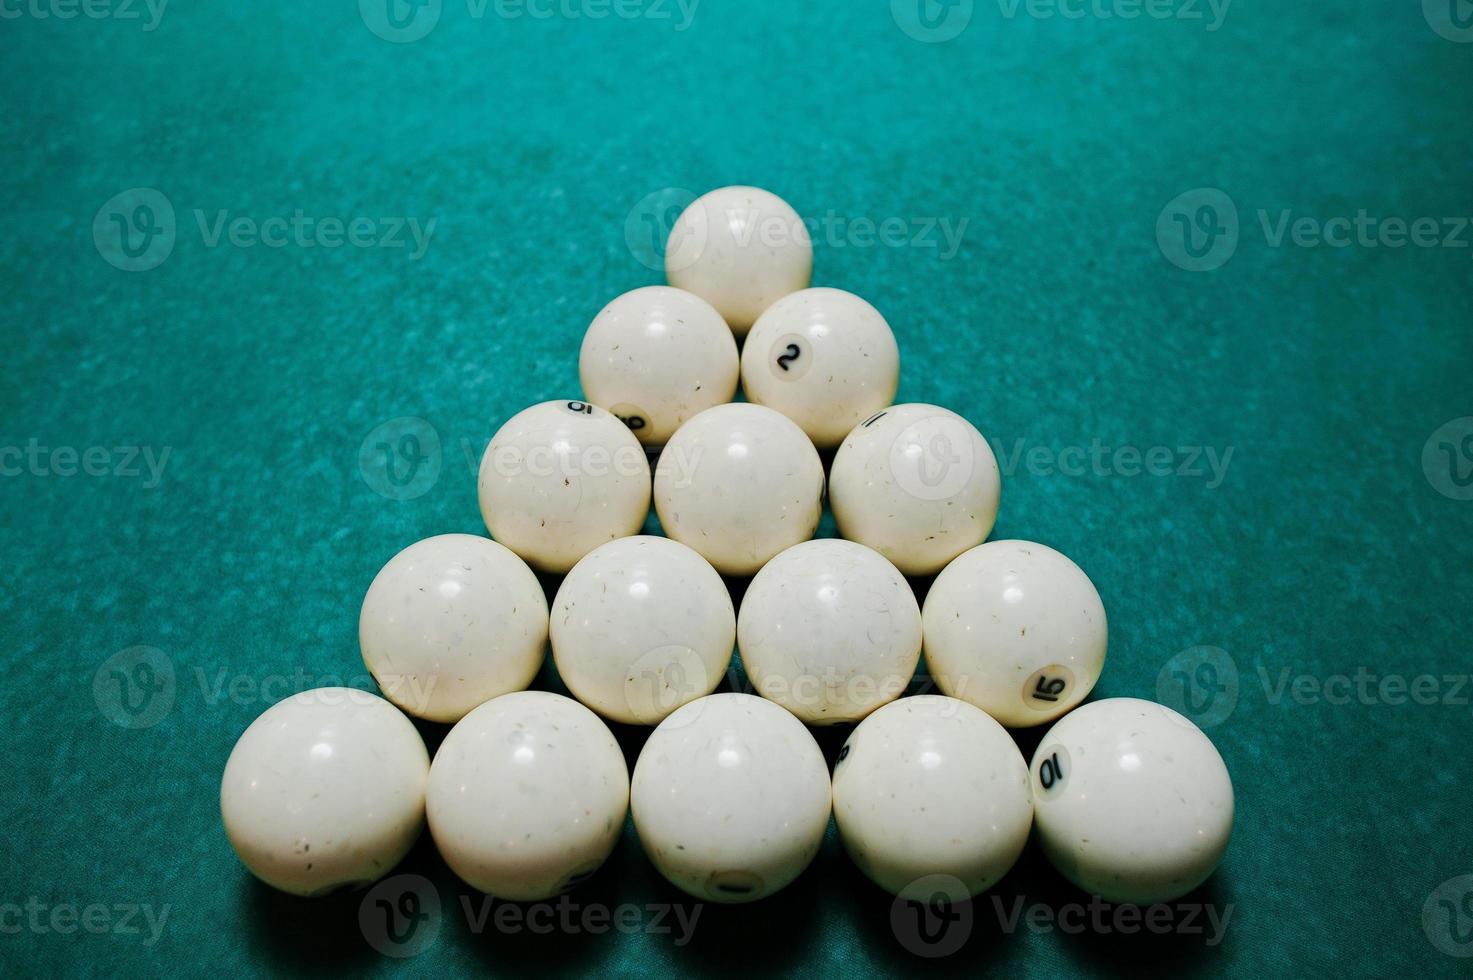 The russian billiards balls on the table photo